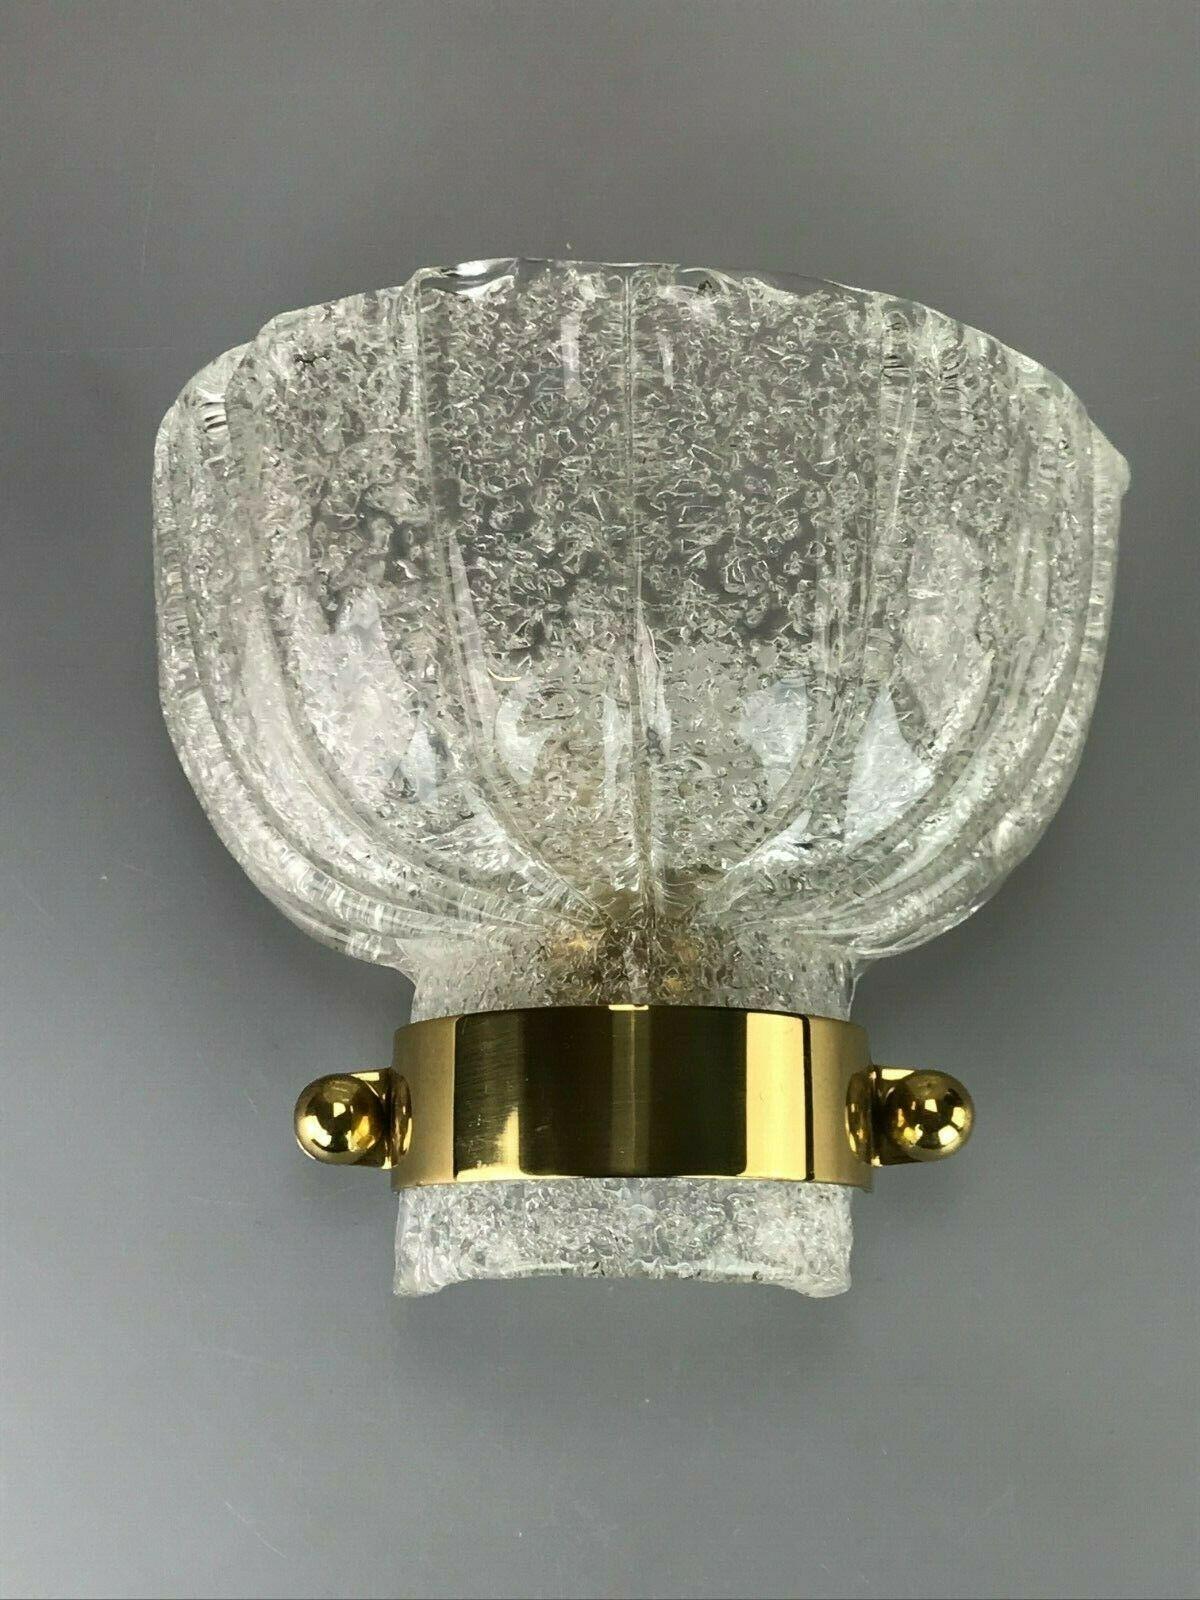 60s 70s Lamp Fixture Wall Sconce Wall Lamp Hillebrand Space Age Design

Object: wall lamp

Manufacturer:

Condition: good

Age: around 1960-1970

Dimensions:

23cm x 20cm x 15.5cm

Other notes:

The pictures serve as part of the